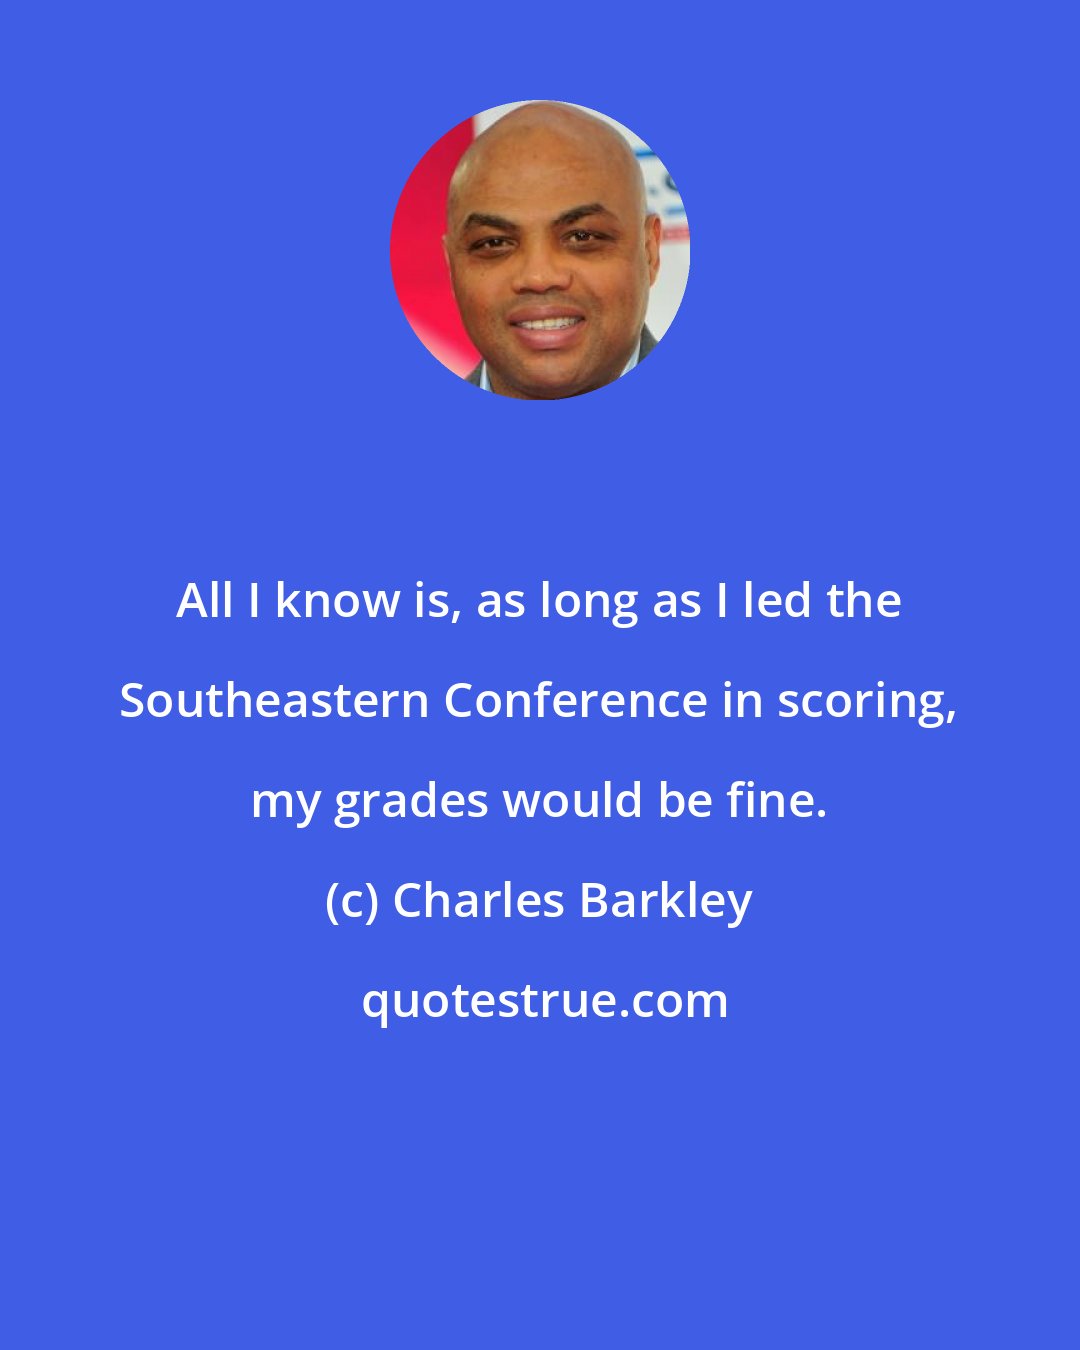 Charles Barkley: All I know is, as long as I led the Southeastern Conference in scoring, my grades would be fine.